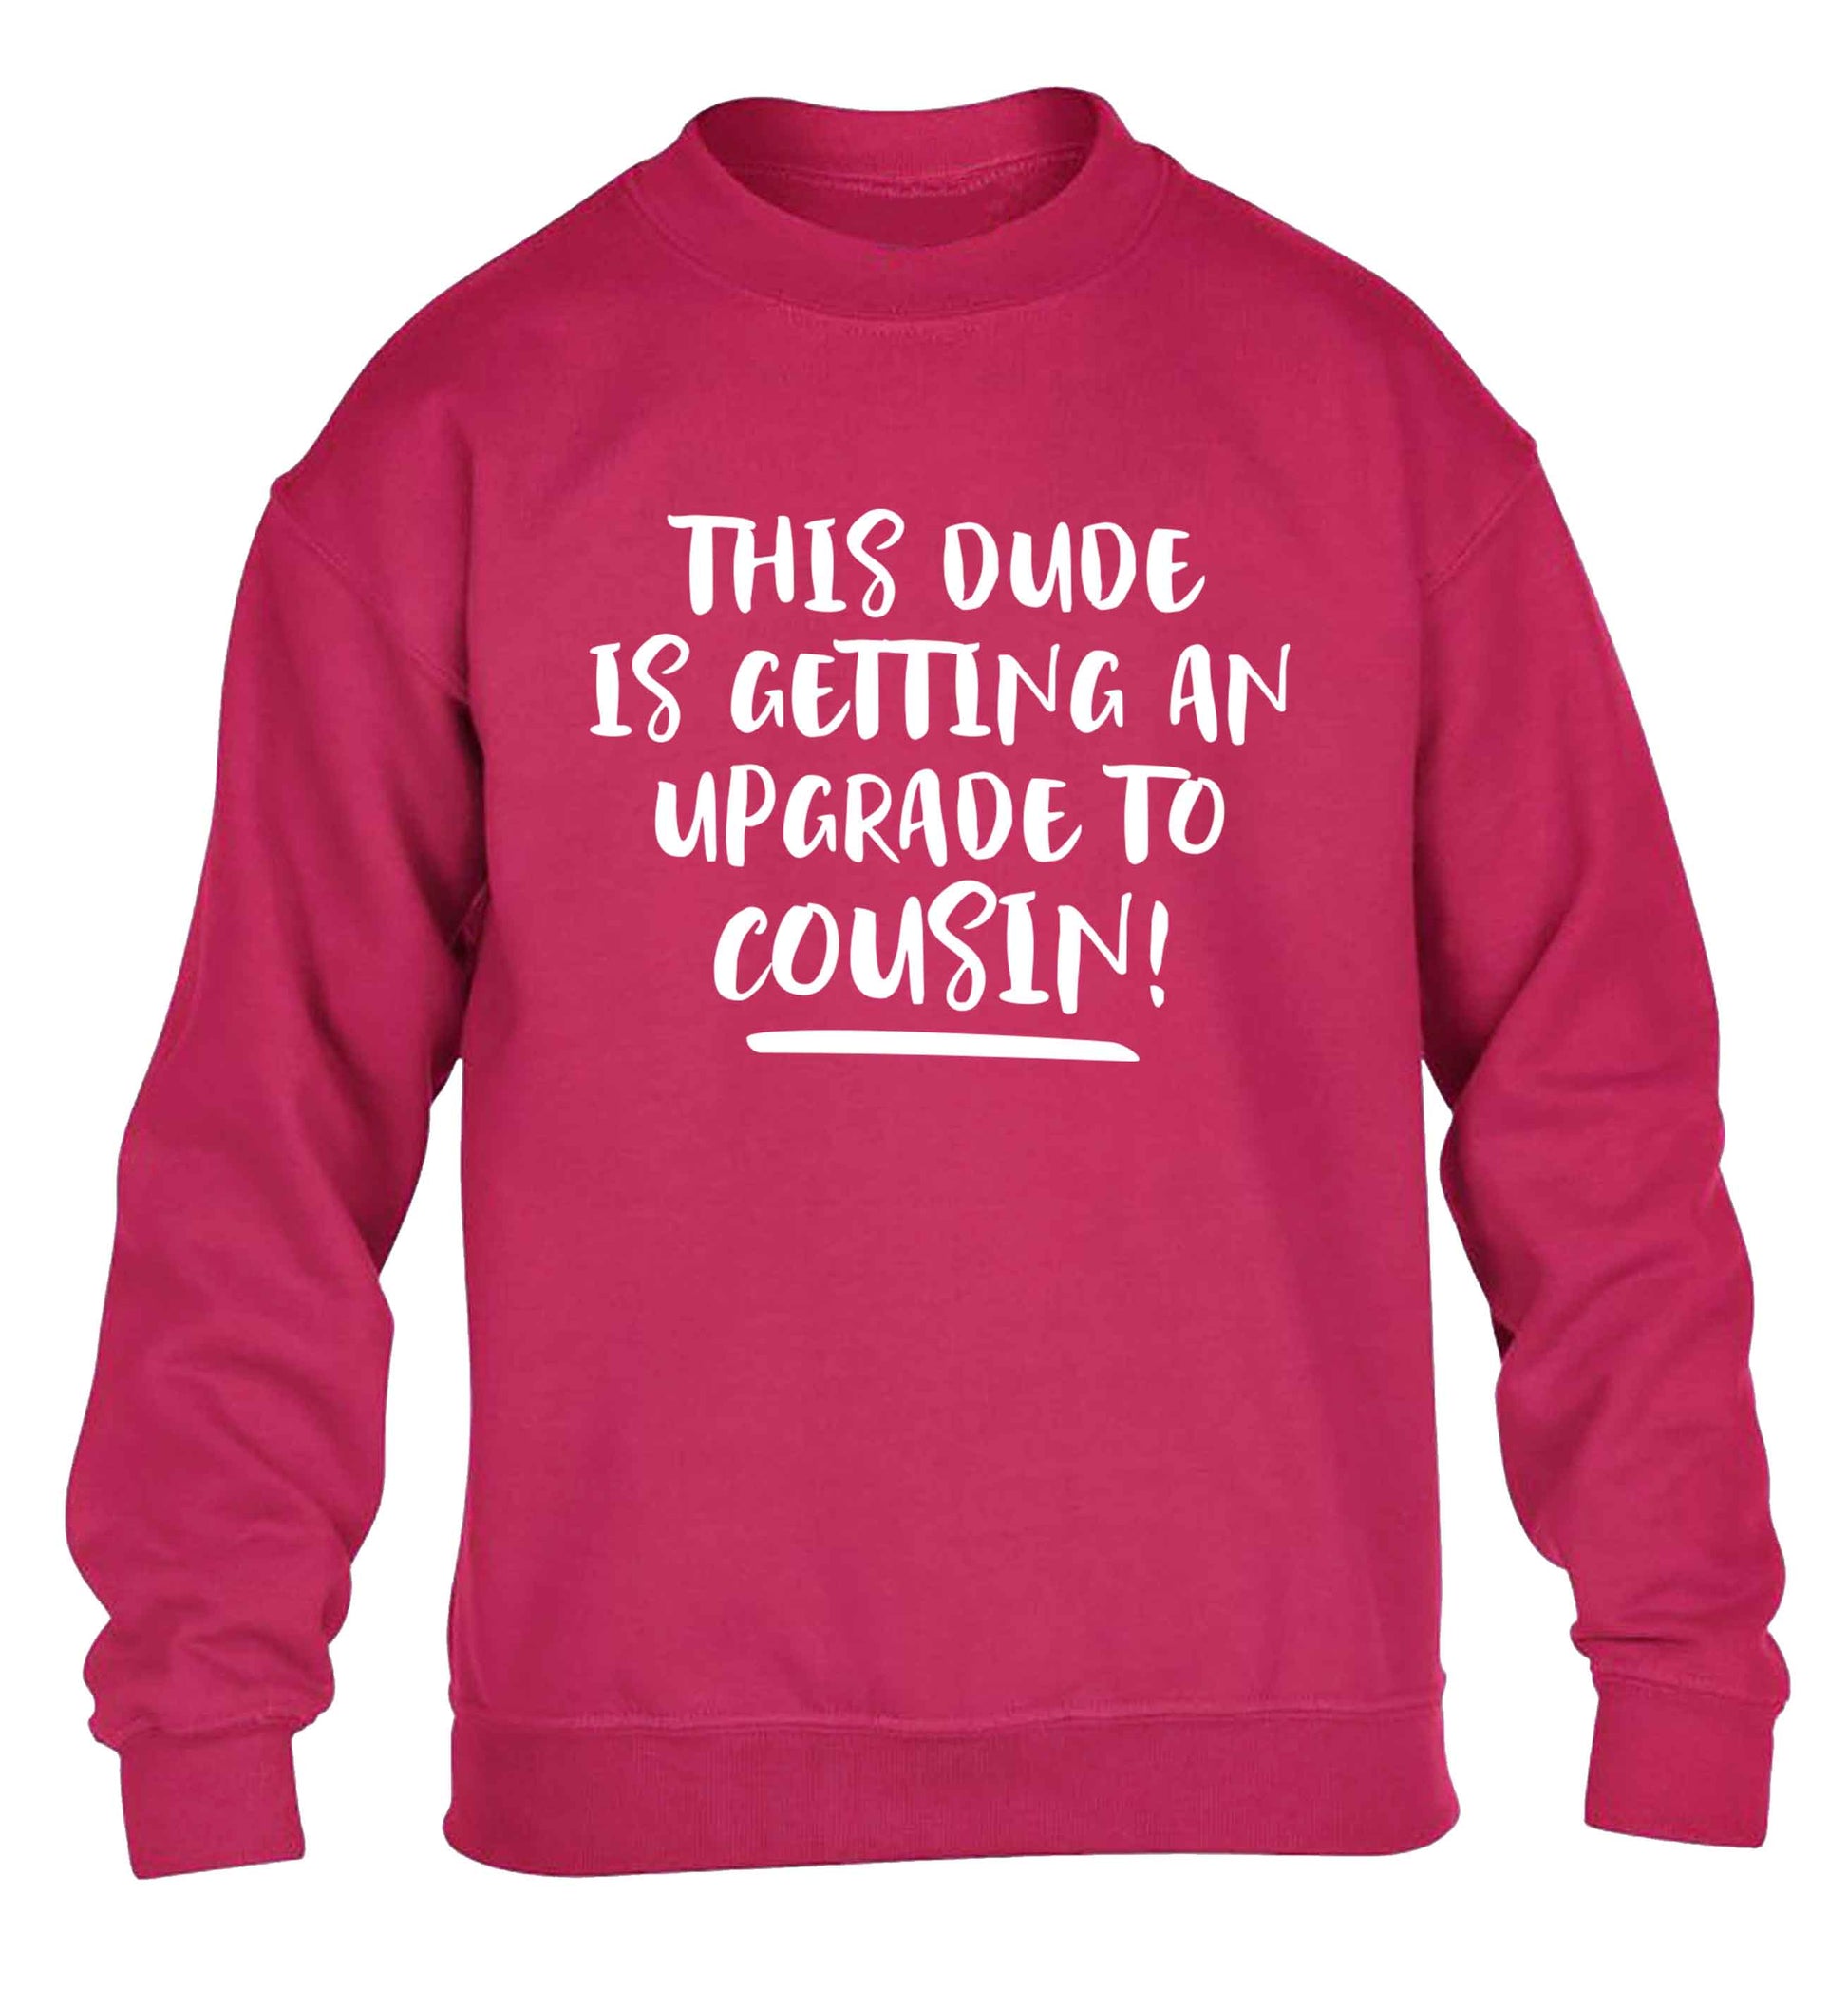 This dude is getting an upgrade to cousin! children's pink sweater 12-13 Years